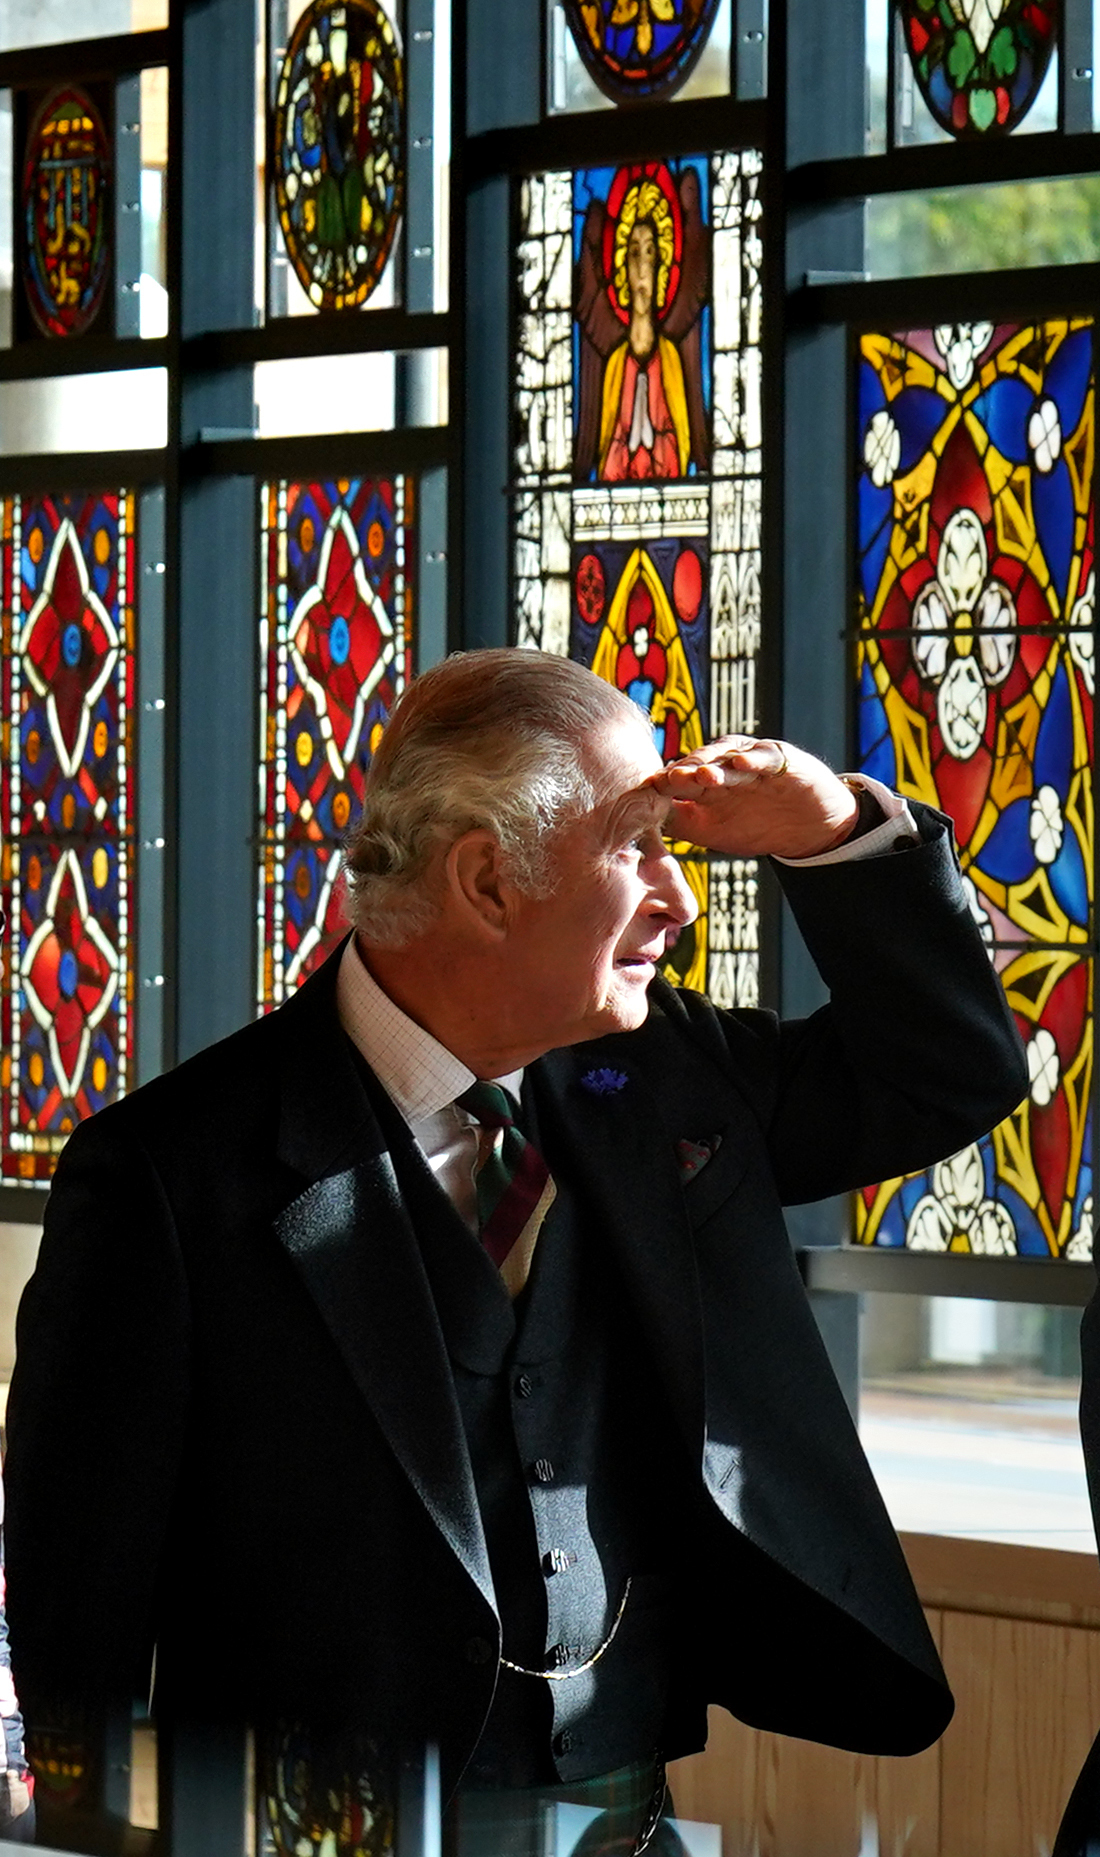 <p>King Charles III peered through the stained-glass windows at the Burrell Collection at Pollok Country Park in Glasgow, Scotland, on Oct. 13, 2022, following a six-year refurbishment project.</p>